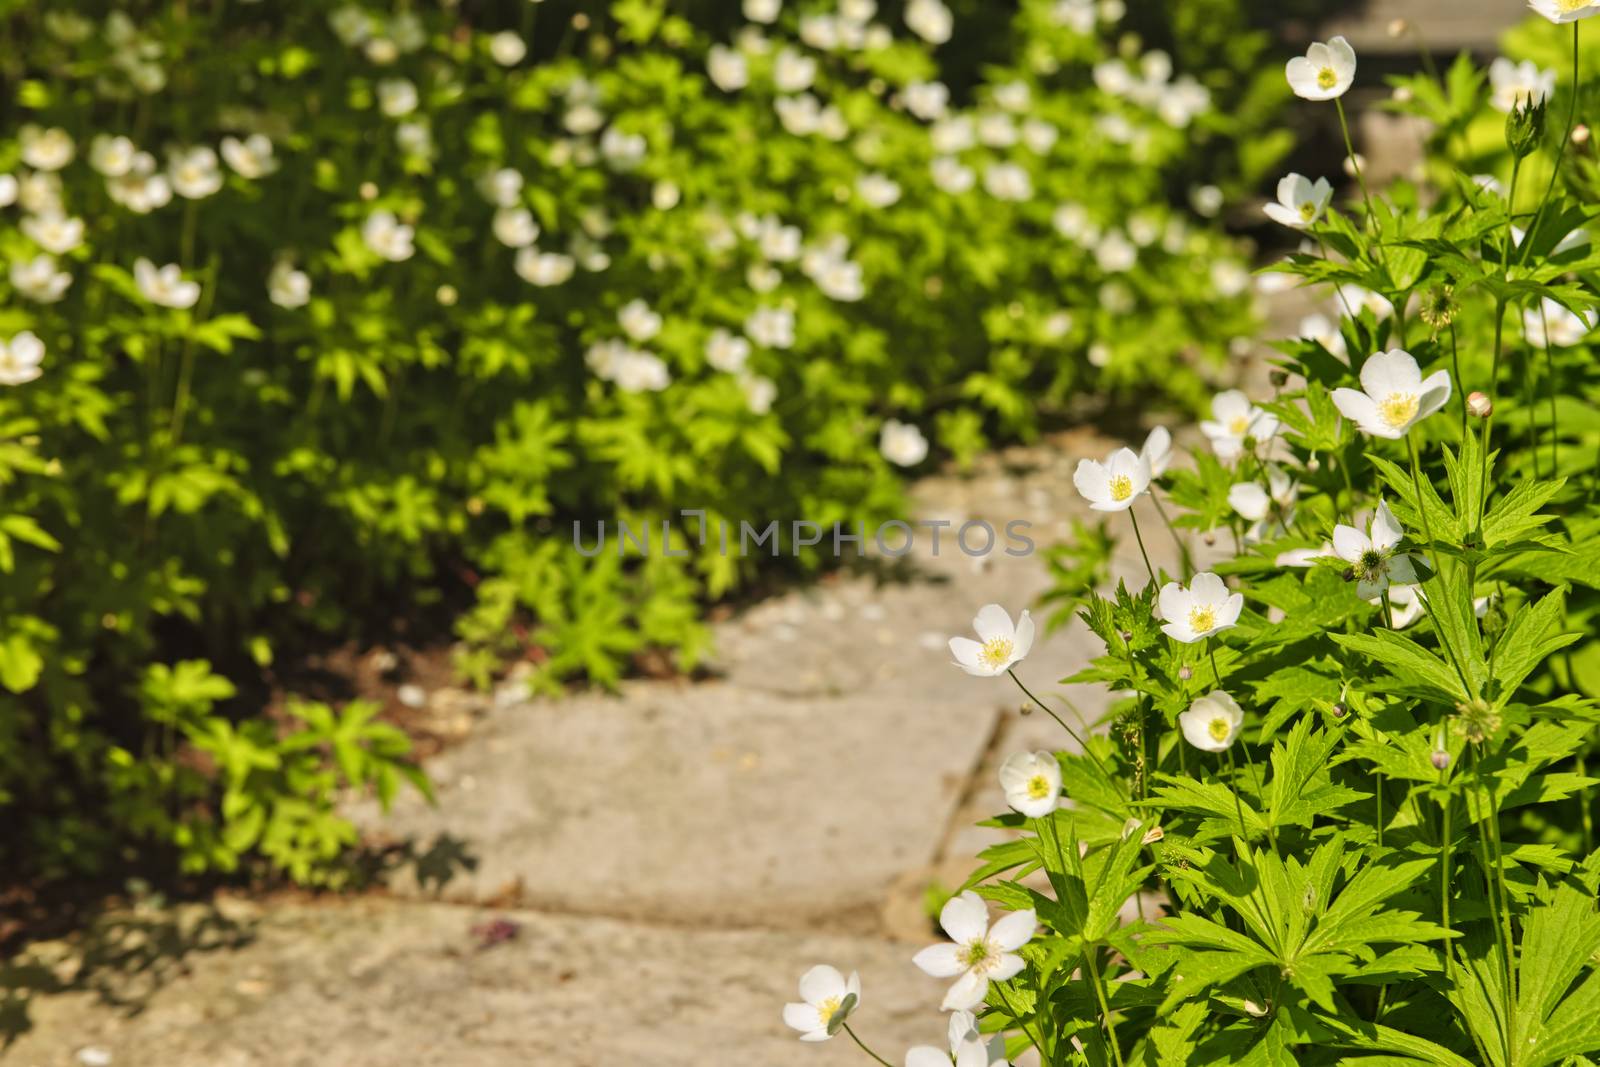 Wildflower garden with paved path and blooming wood anemones